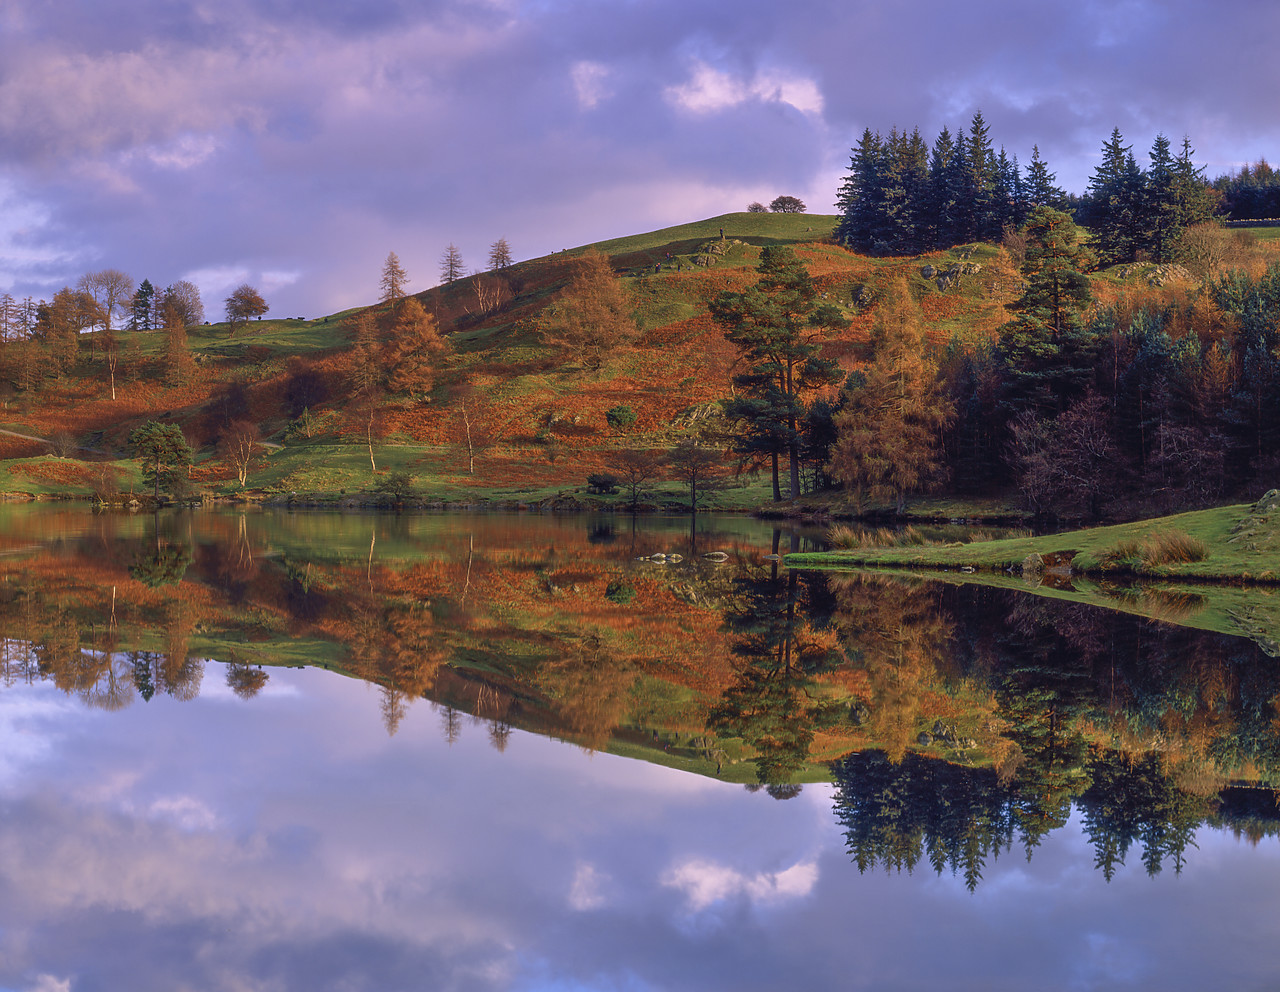 #980994-1 - Tarn Hows Reflections, Lake District National Park, Cumbria